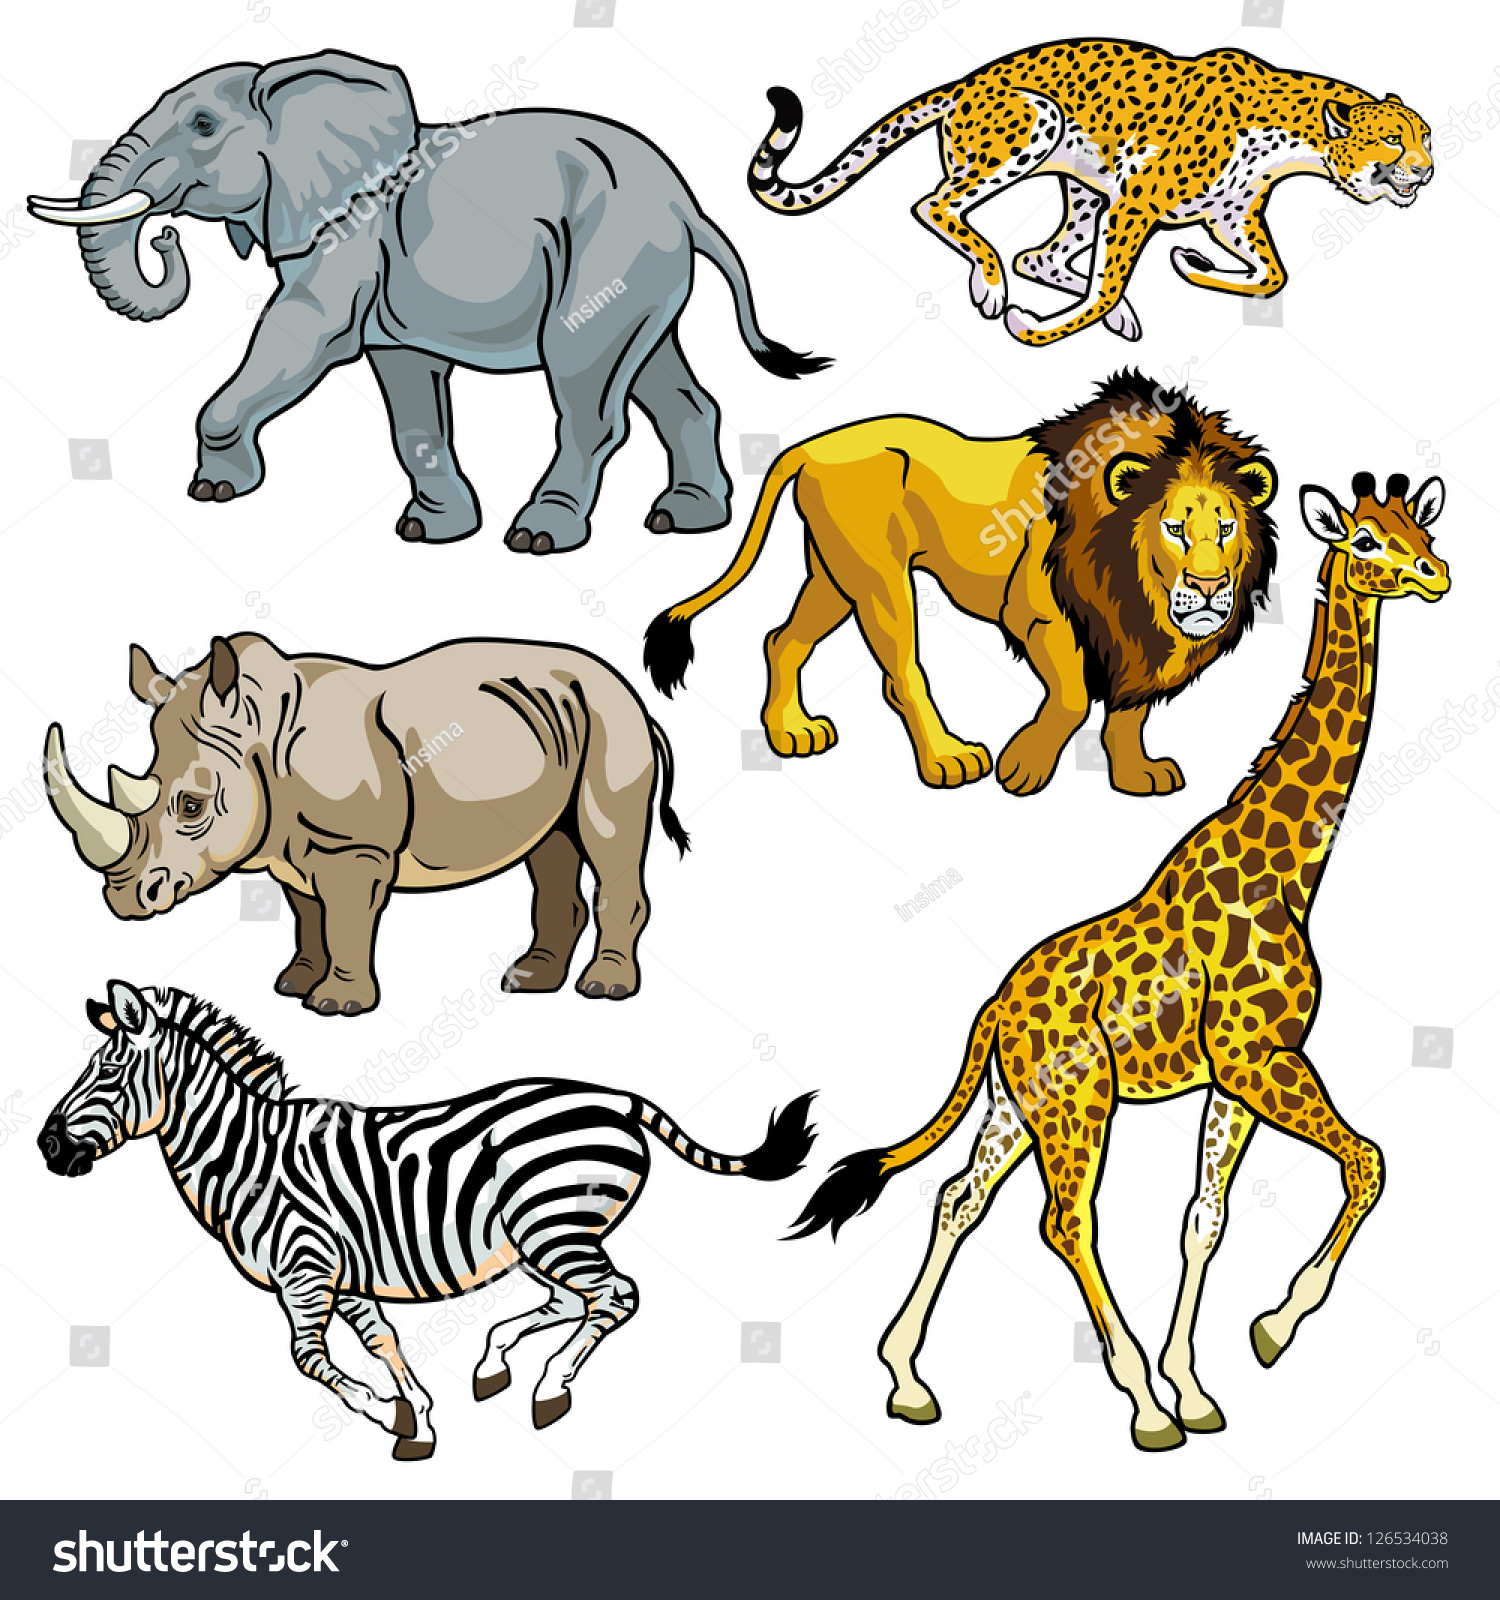 africa animal clipart - photo #20